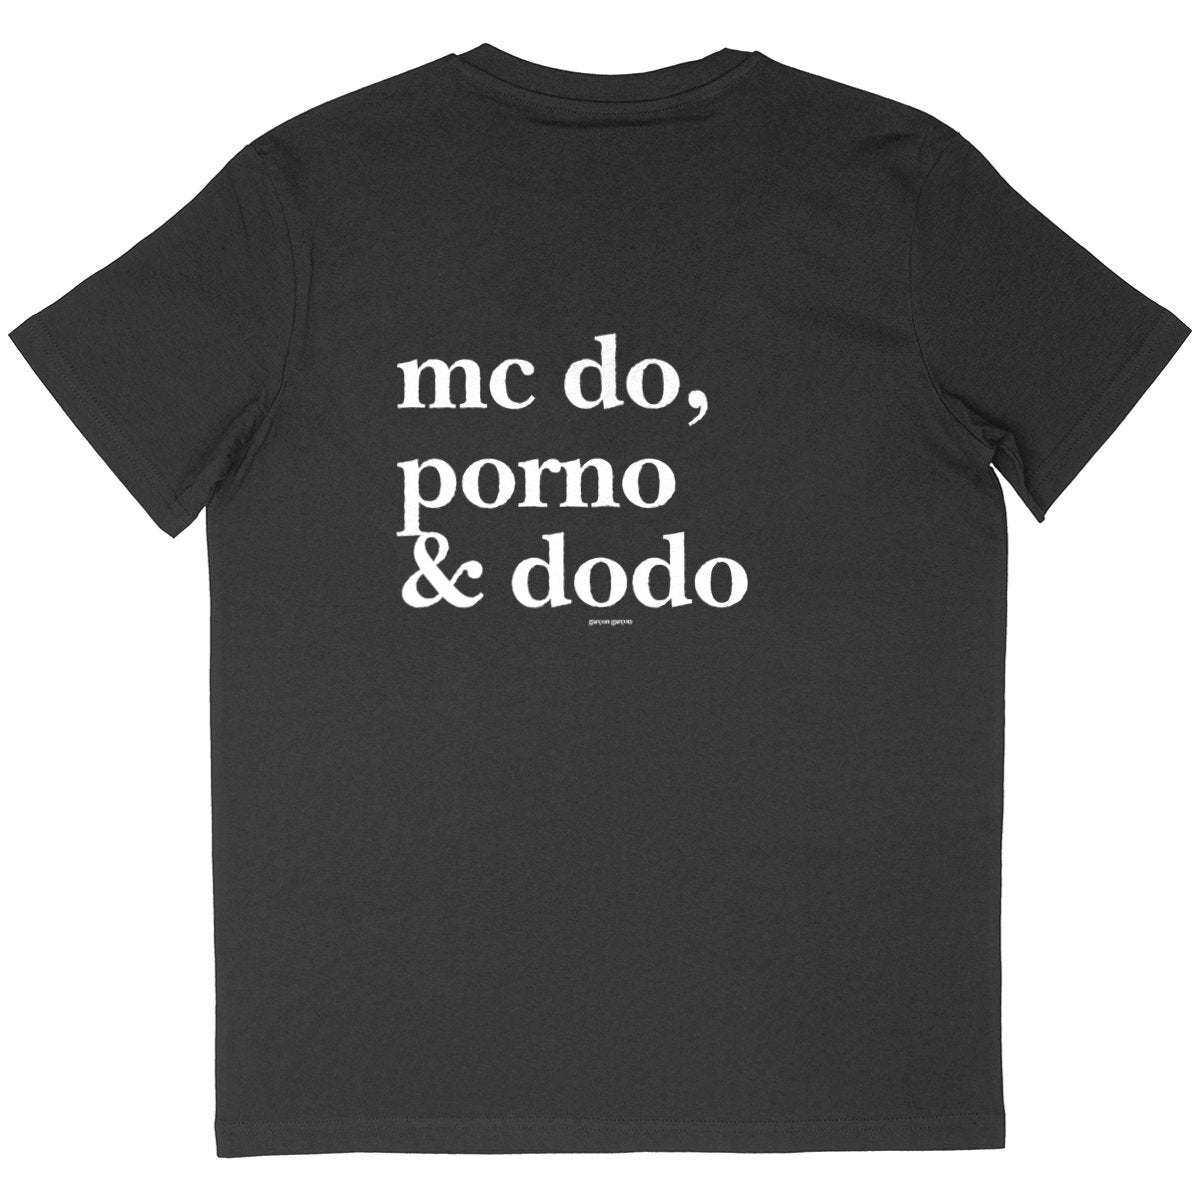 mcdo, PORNO & DODO BLACK OVERSIZED TEE; BLACK tee oversized.garçon garçon tee oversize BLACK. Dive into the essence of Parisian cool with this oversized tee. The subtle 'garçon garçon' signature whispers a chic narrative, offering a slice of the city's famed elegance. Perfect for those who speak style with simplicity.